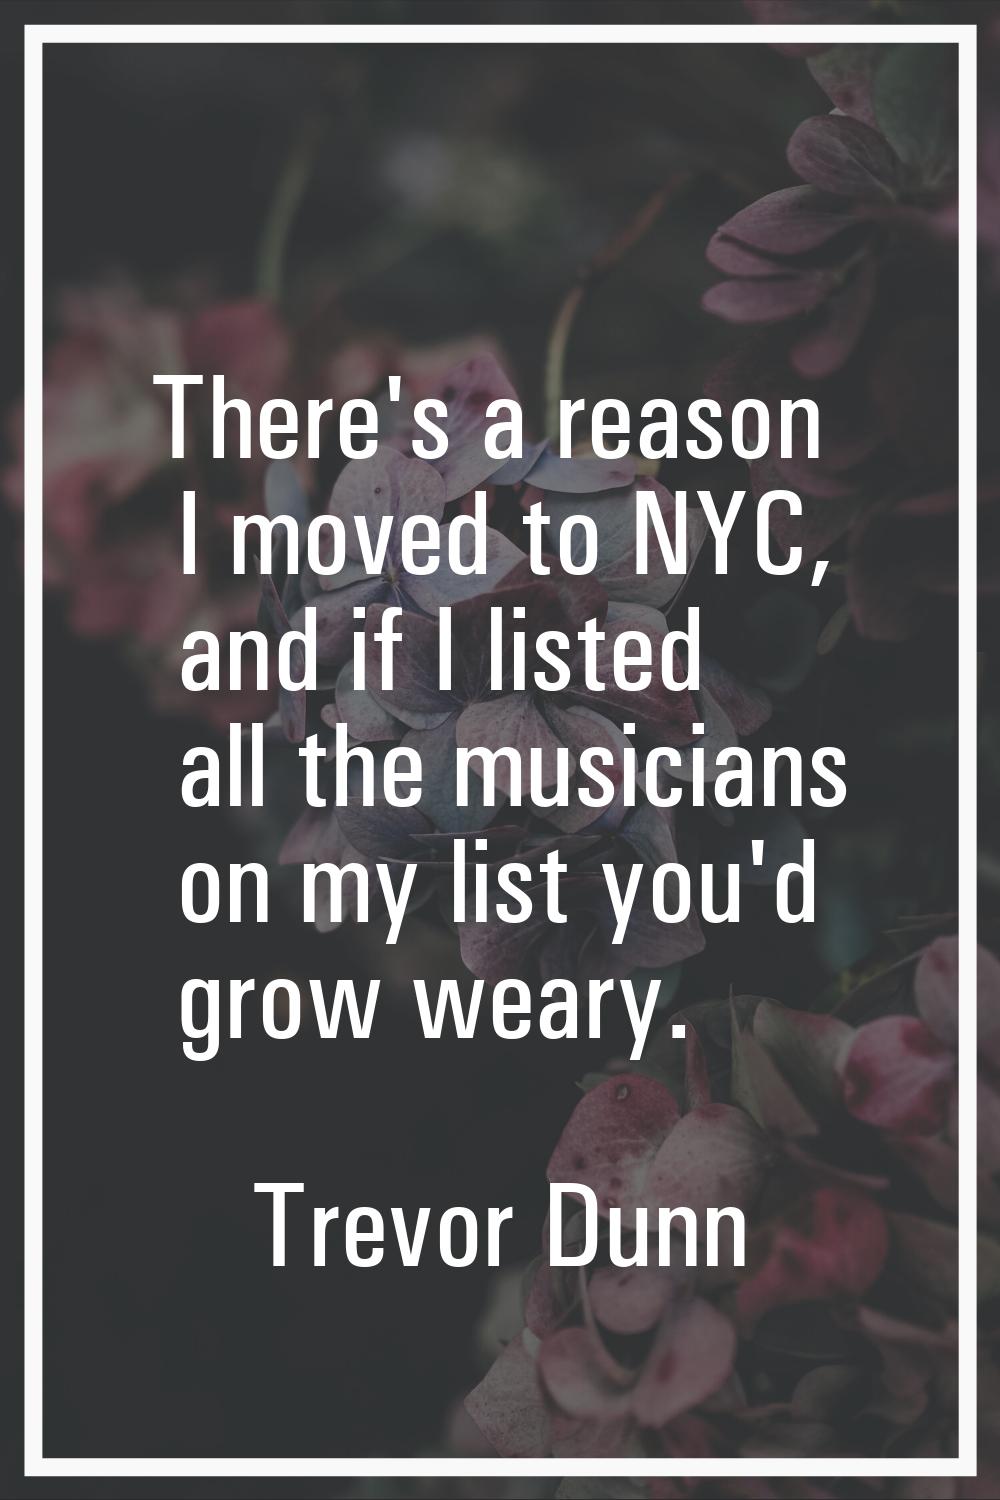 There's a reason I moved to NYC, and if I listed all the musicians on my list you'd grow weary.